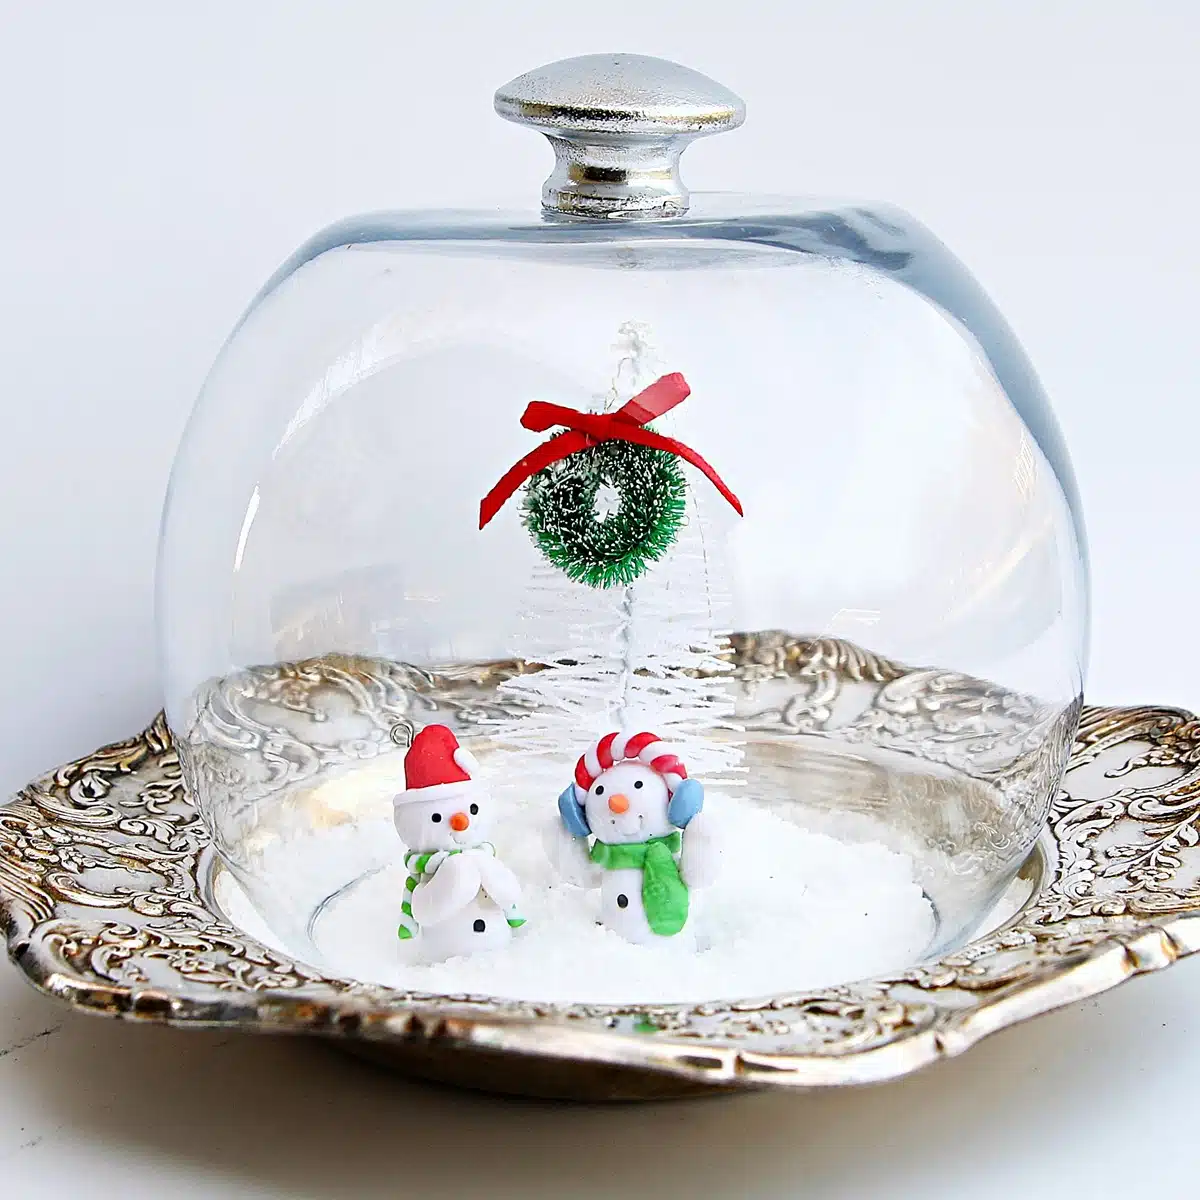 snow scene created with a silver plate dish and clear bowl globe 6